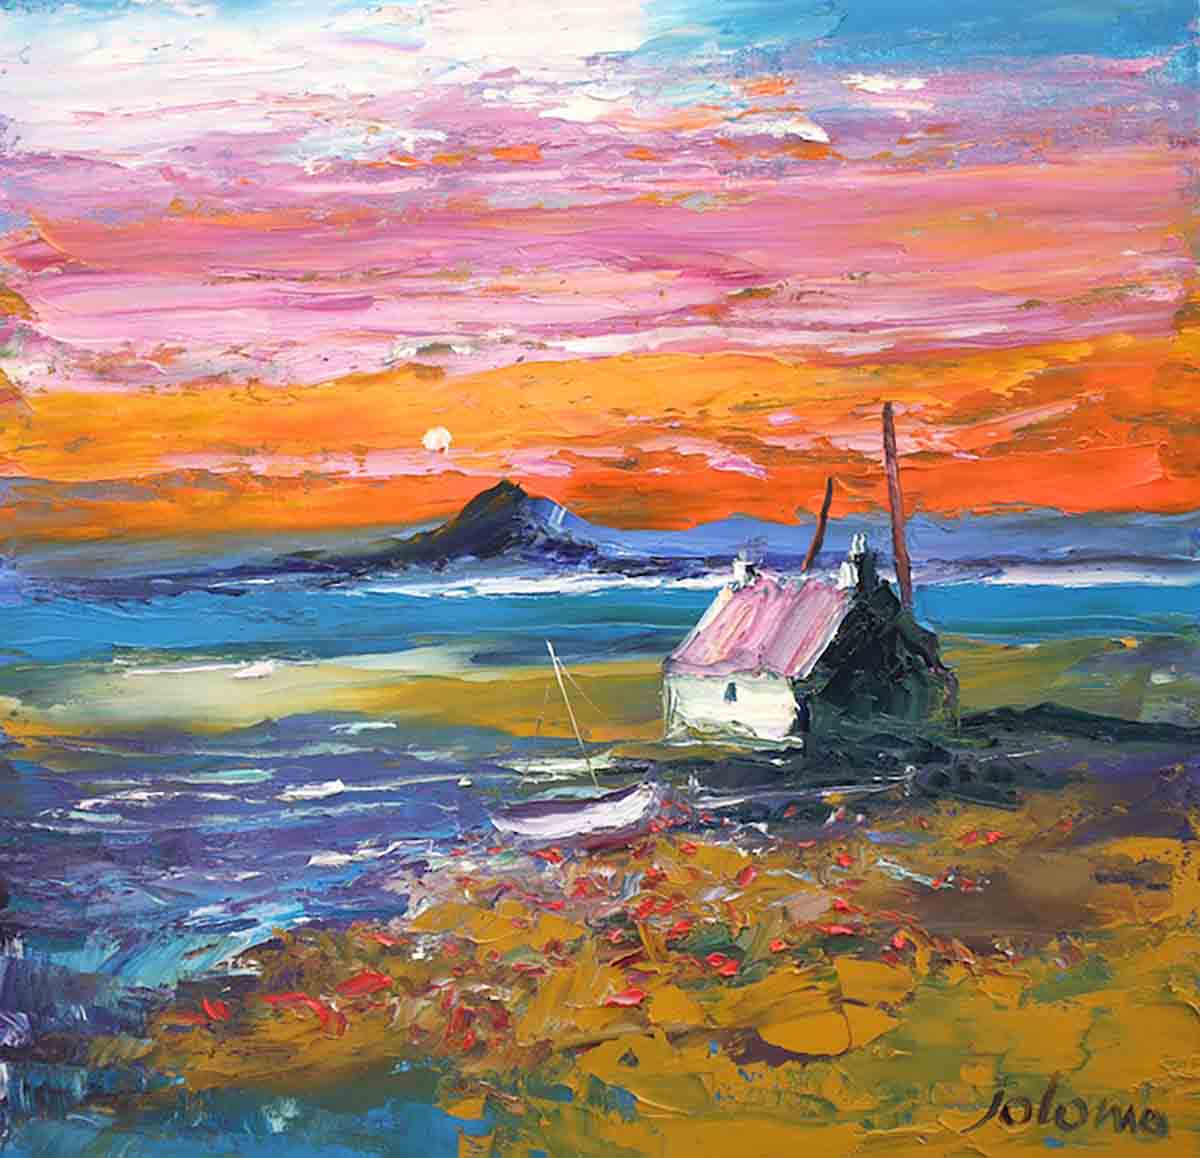 @galleryqdundee’s current exhibition is an opportunity to view John Lowrie Morrison aka Jolomo's latest works, revisiting favourite sites on the Isle of Harris.
artmag.co.uk/john-lowrie-mo…
#artmag #scottishart #scottishgalleries #scottishartonline #scottishpainting #scottishprinting